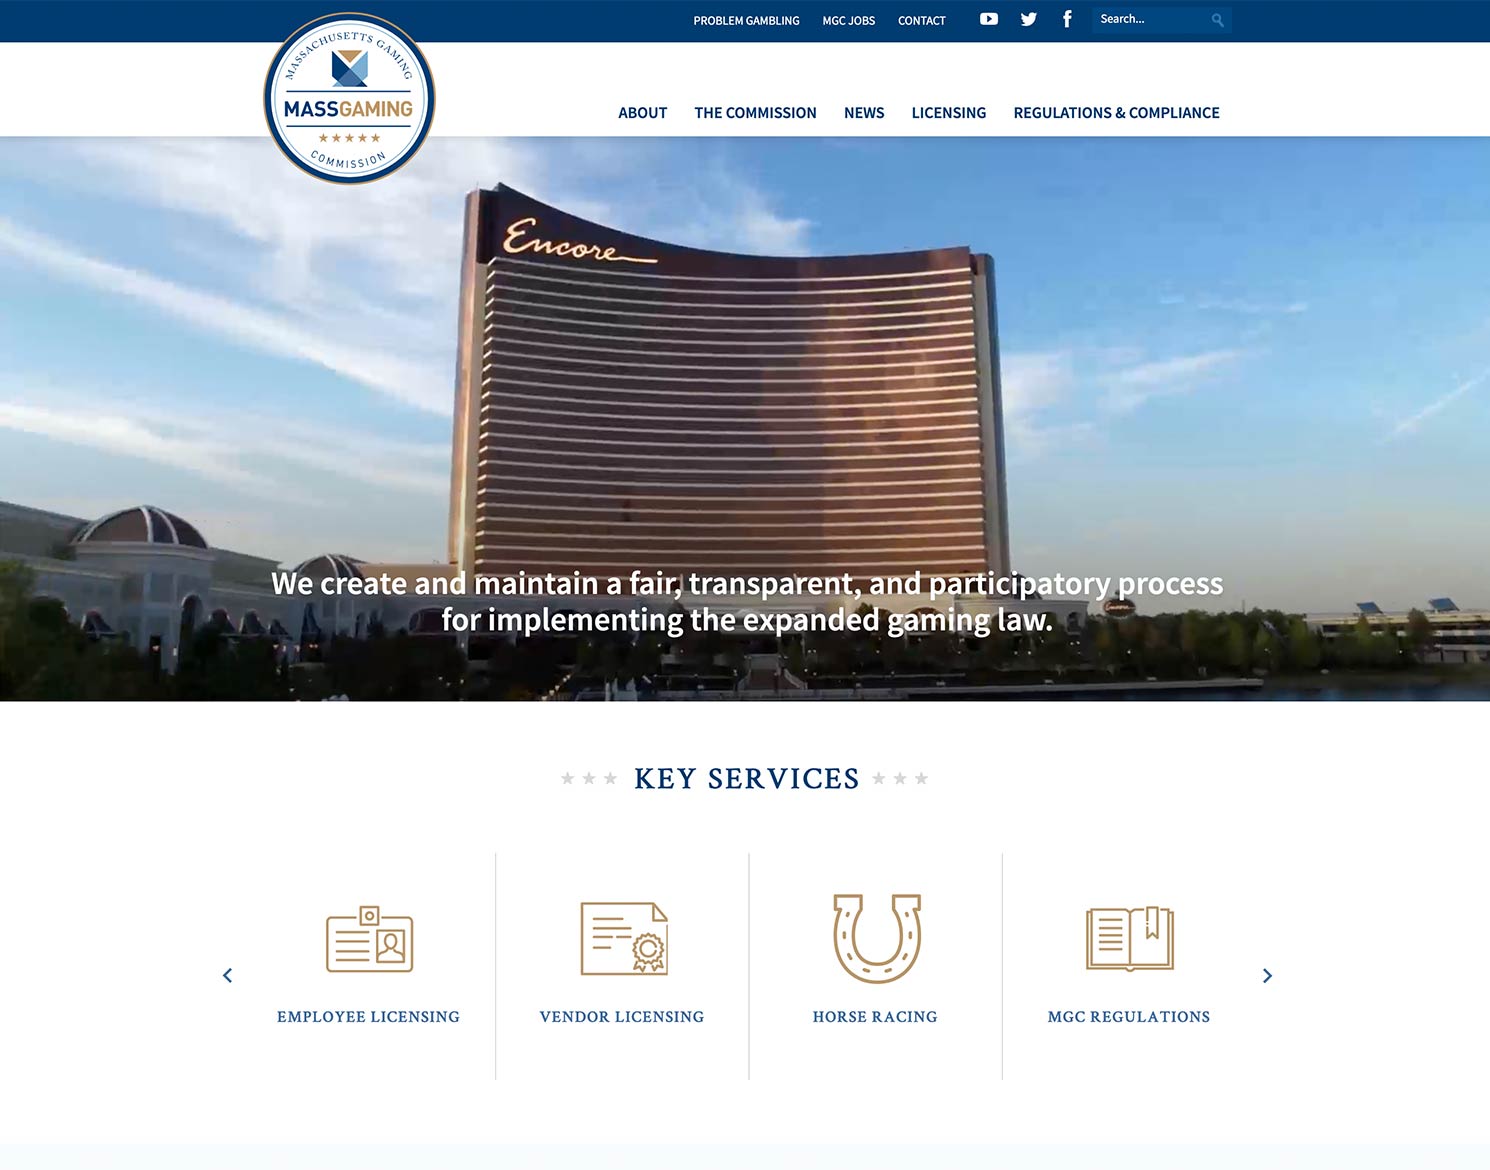 Massachusetts Gaming Commission website homepage - a main photo of the Encore Hotel with the caption "We create and maintain a fair, transparent, and participatory process for implementing the expanded gaming law."